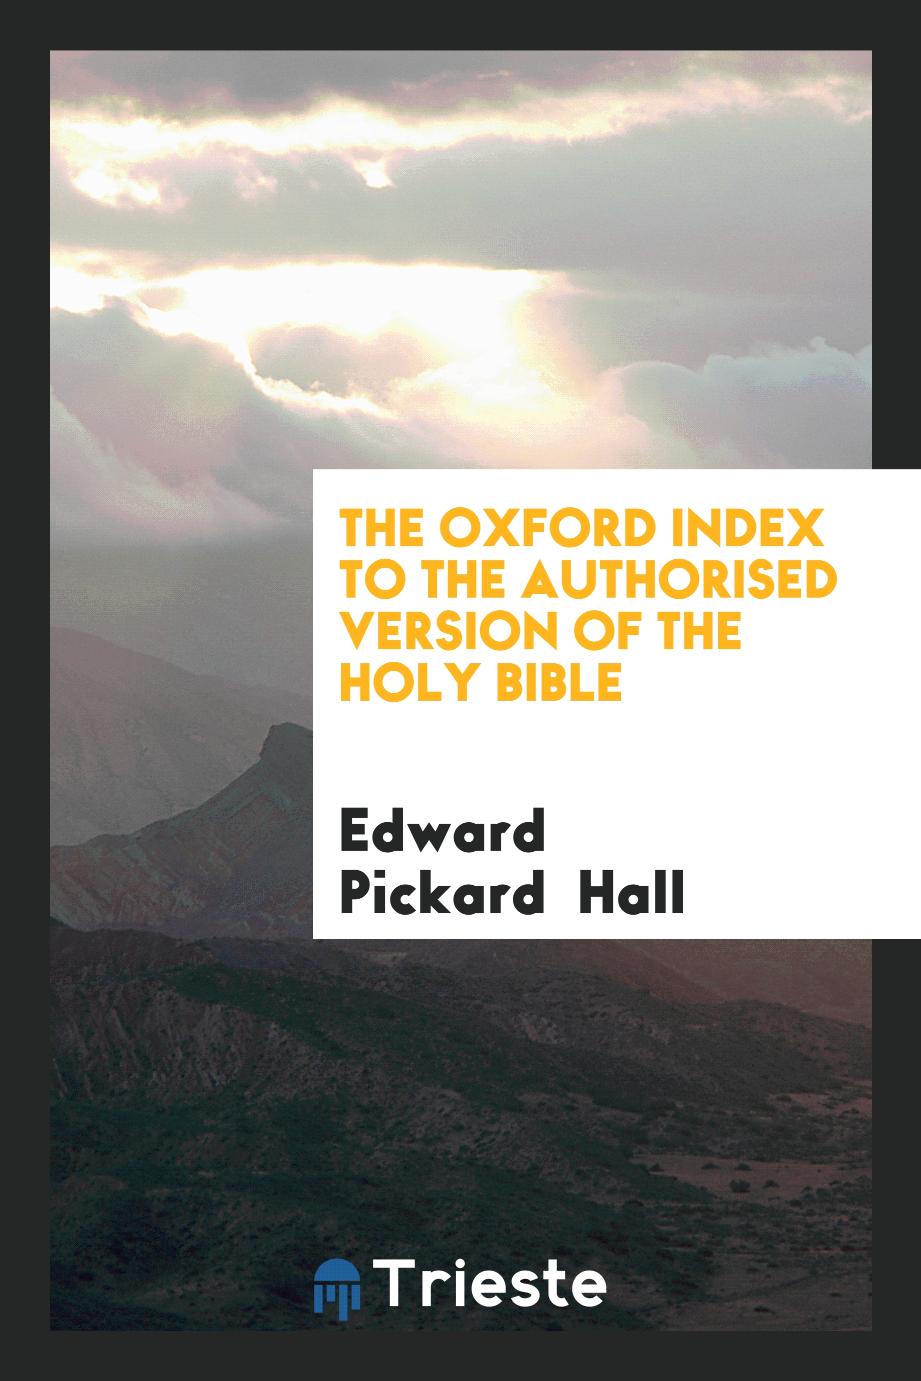 The Oxford index to the Authorised version of the Holy Bible